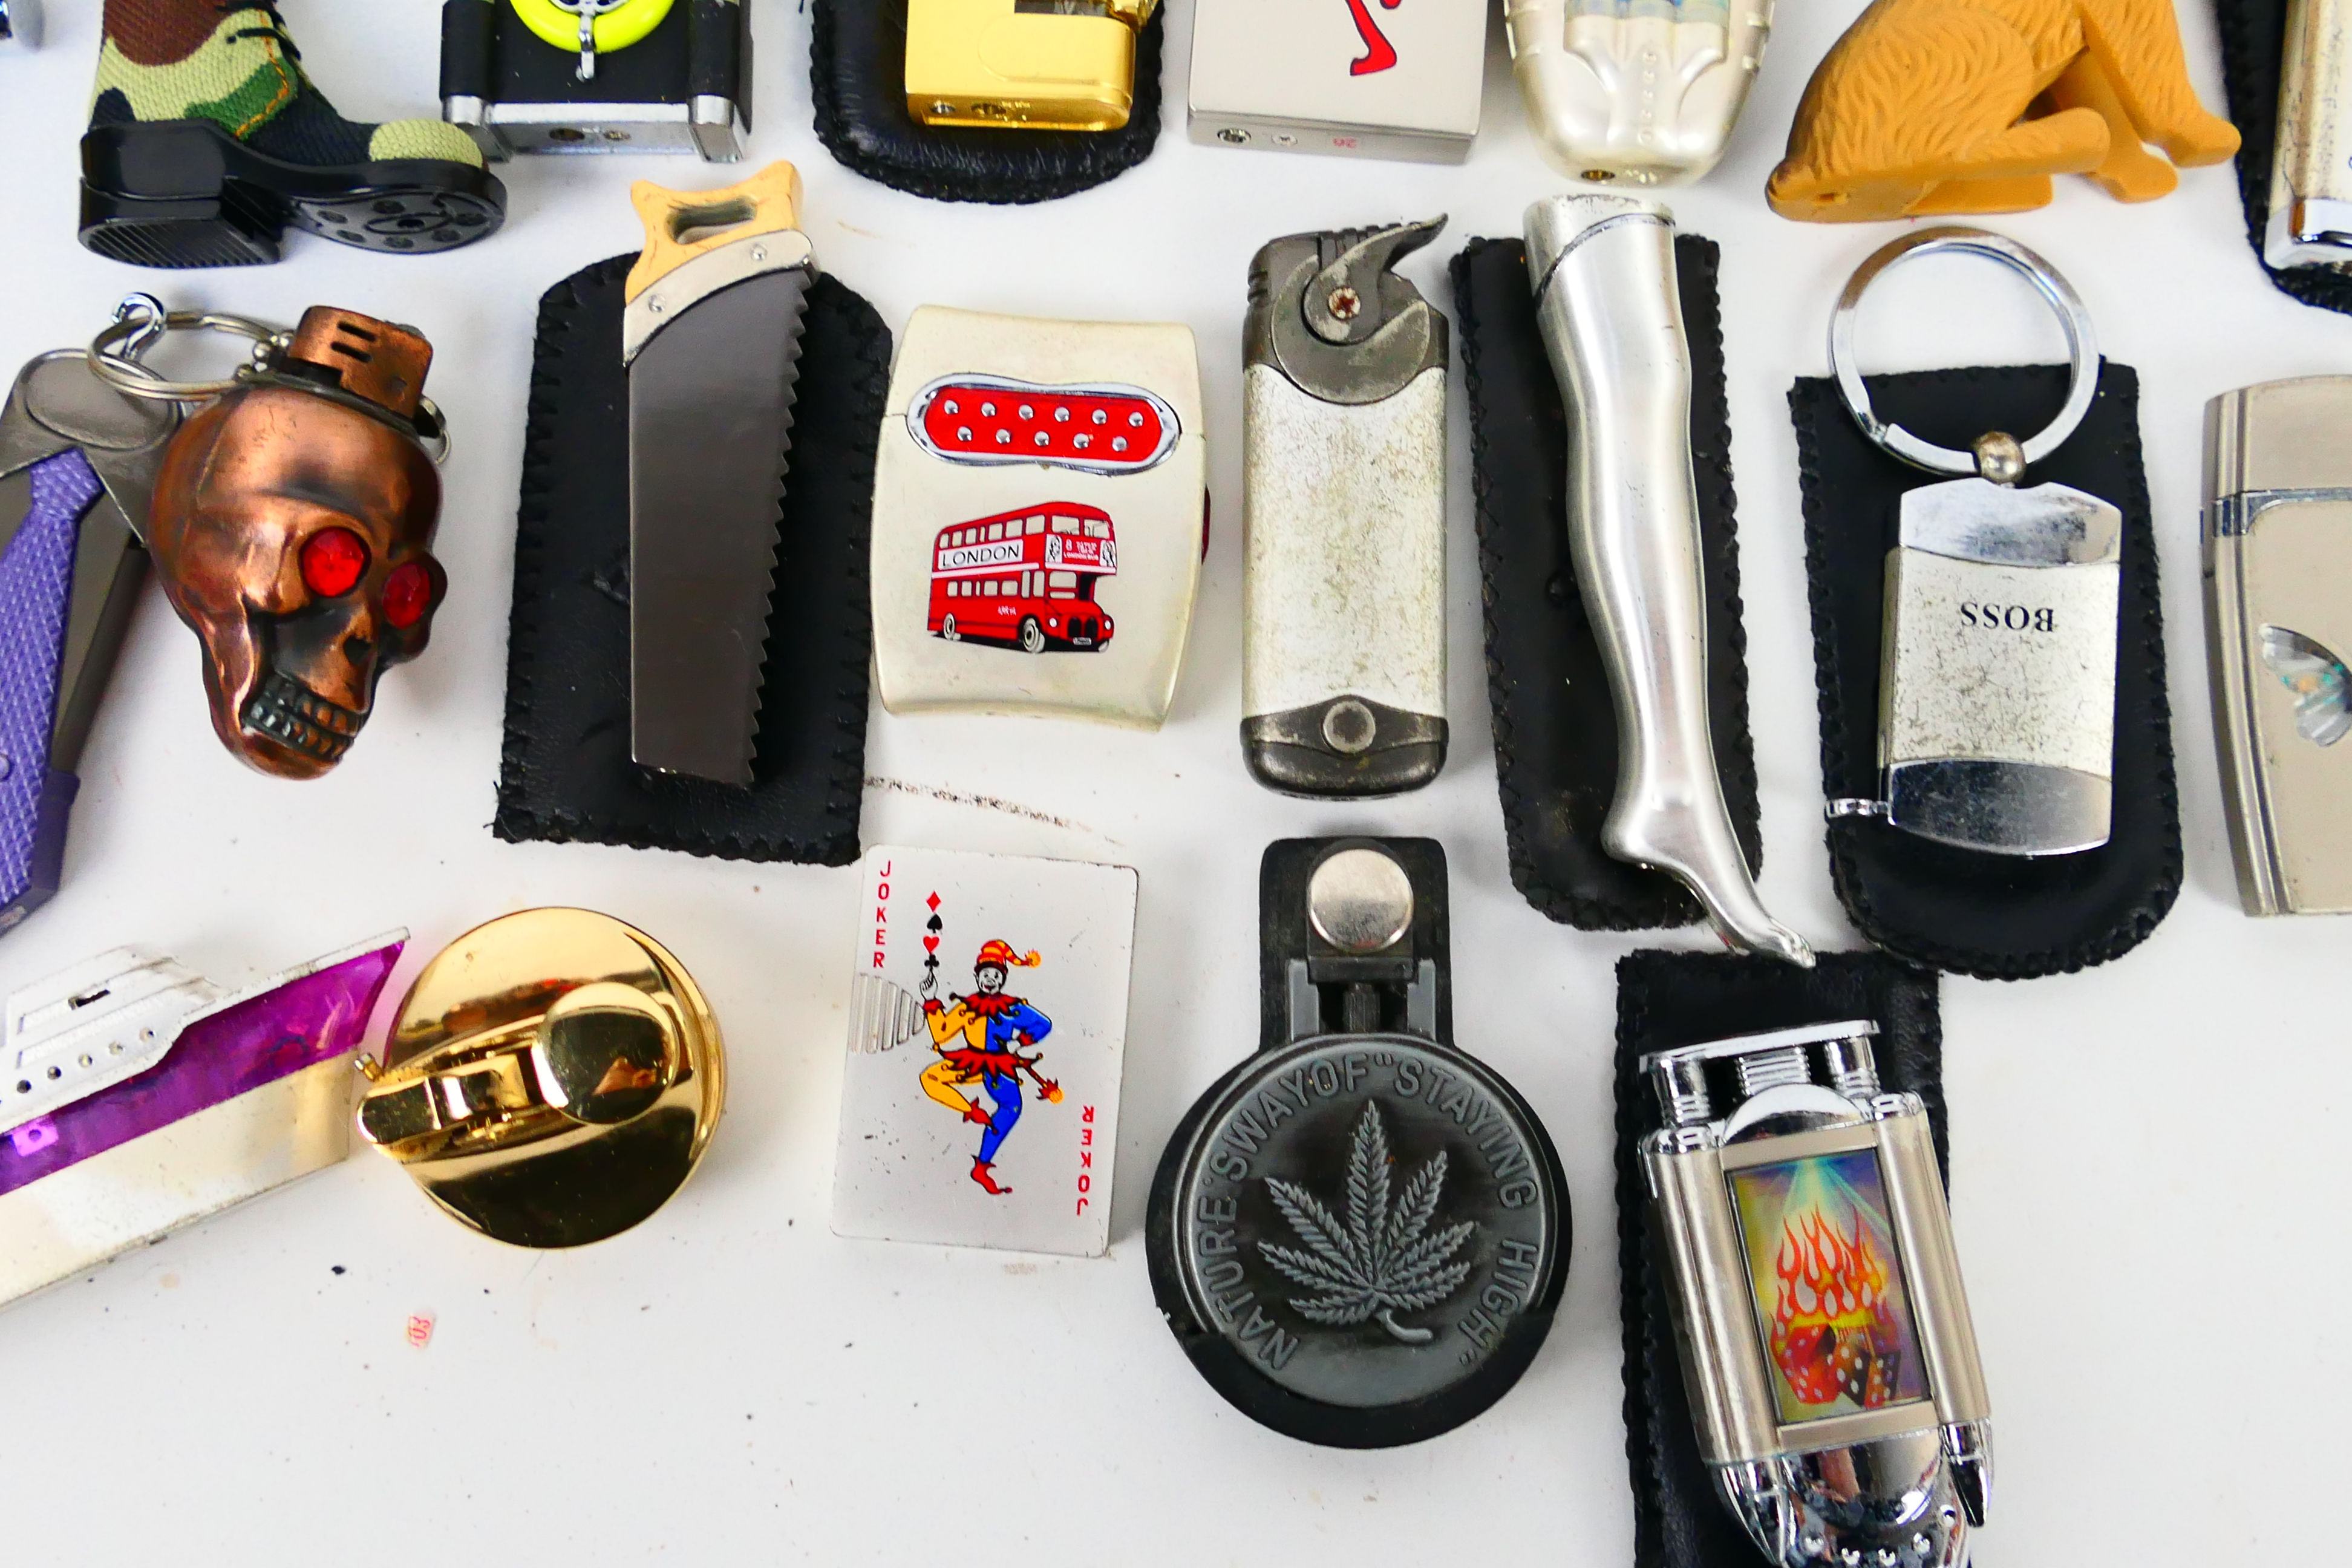 A collection of novelty cigarette lighters and protective cases. - Image 4 of 7